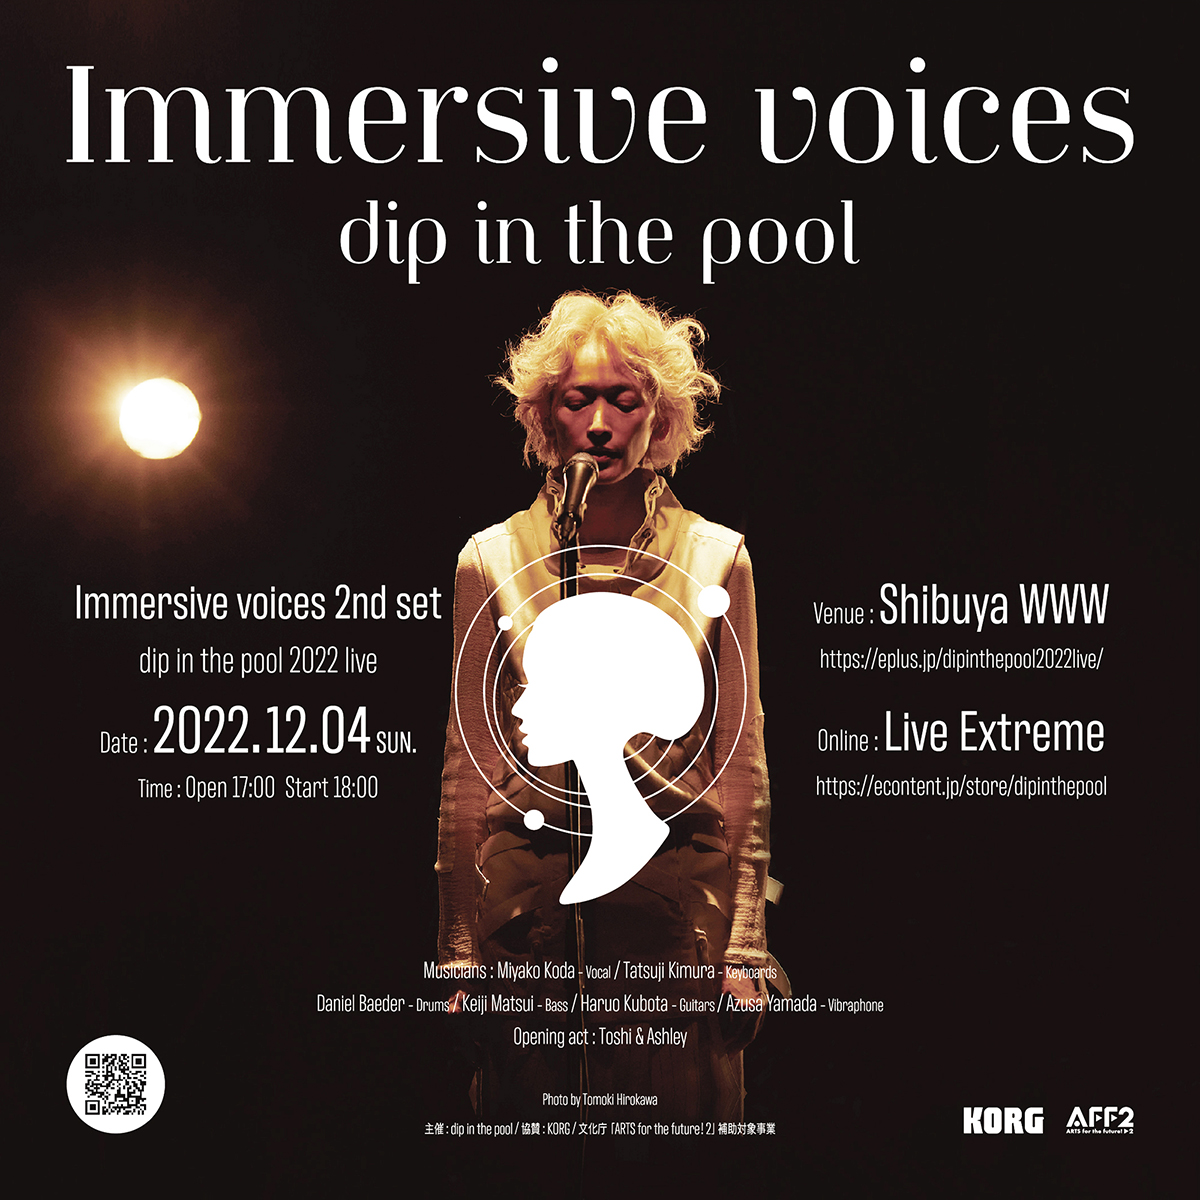 dip in the pool “Immersive voices 2nd set”